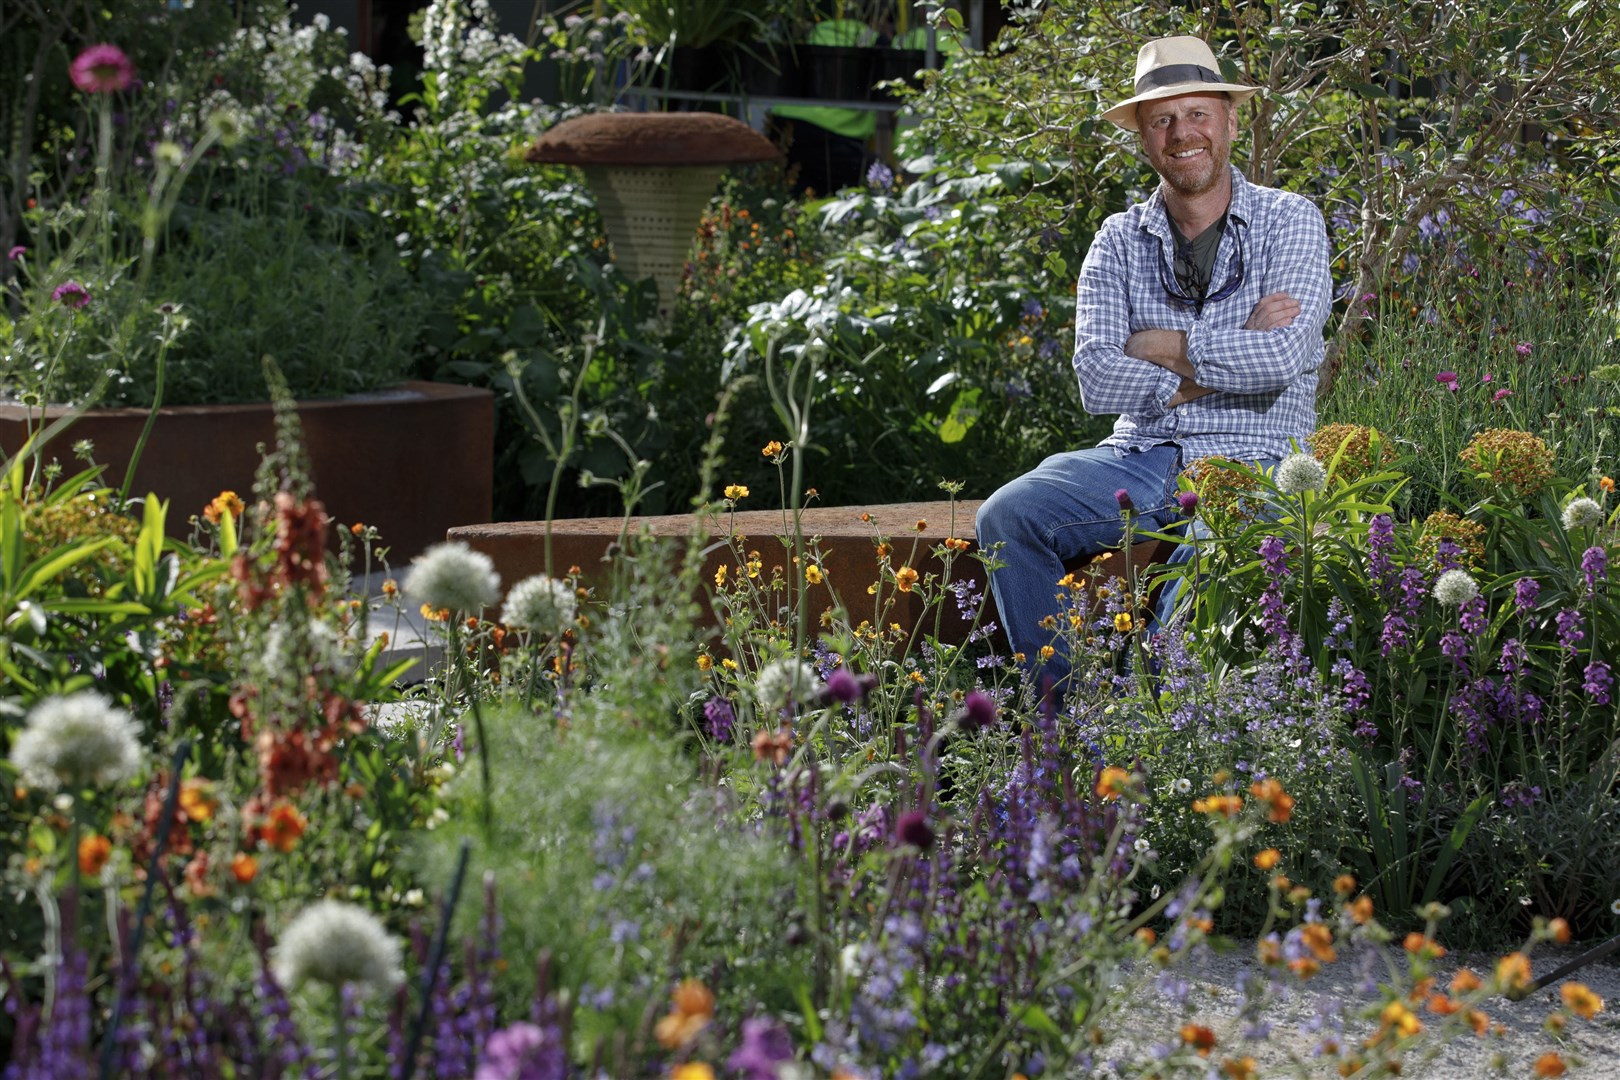 Garden designer Joe Swift in the BBC Studios Our Green Planet and RHS Bee Garden he designed, a space filled with plants for pollinators (Luke MacGregor/RHS/PA)